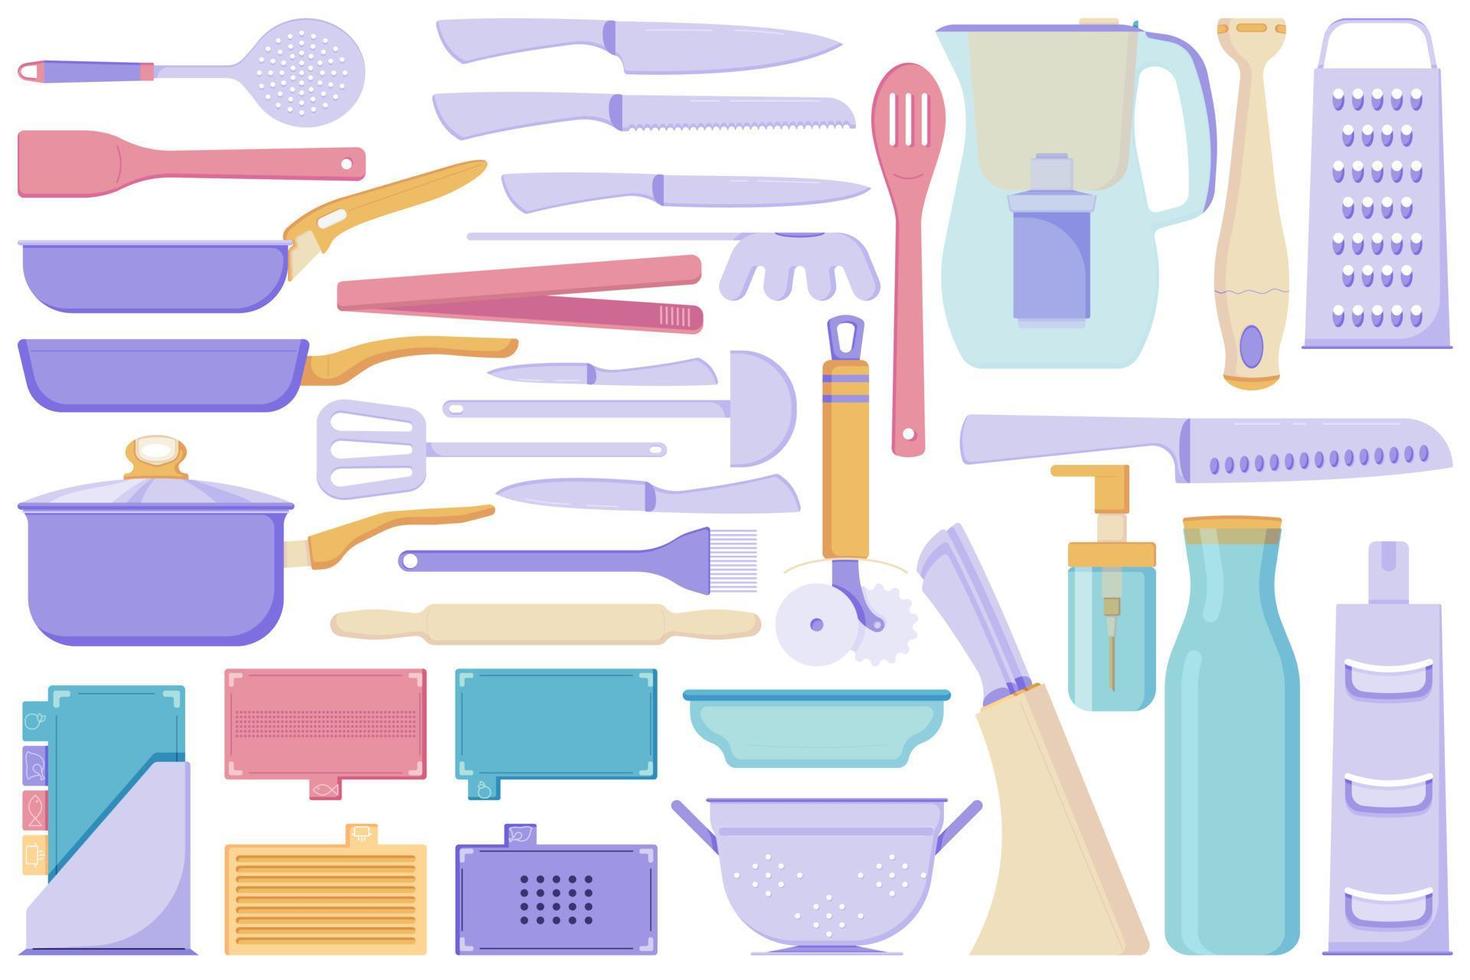 A set of kitchen appliances for cooking, kitchen utensils, knives, jugs, cutting boards, pans and ladles, bowls, grater, colander and other elements in a flat style isolated on a white background vector